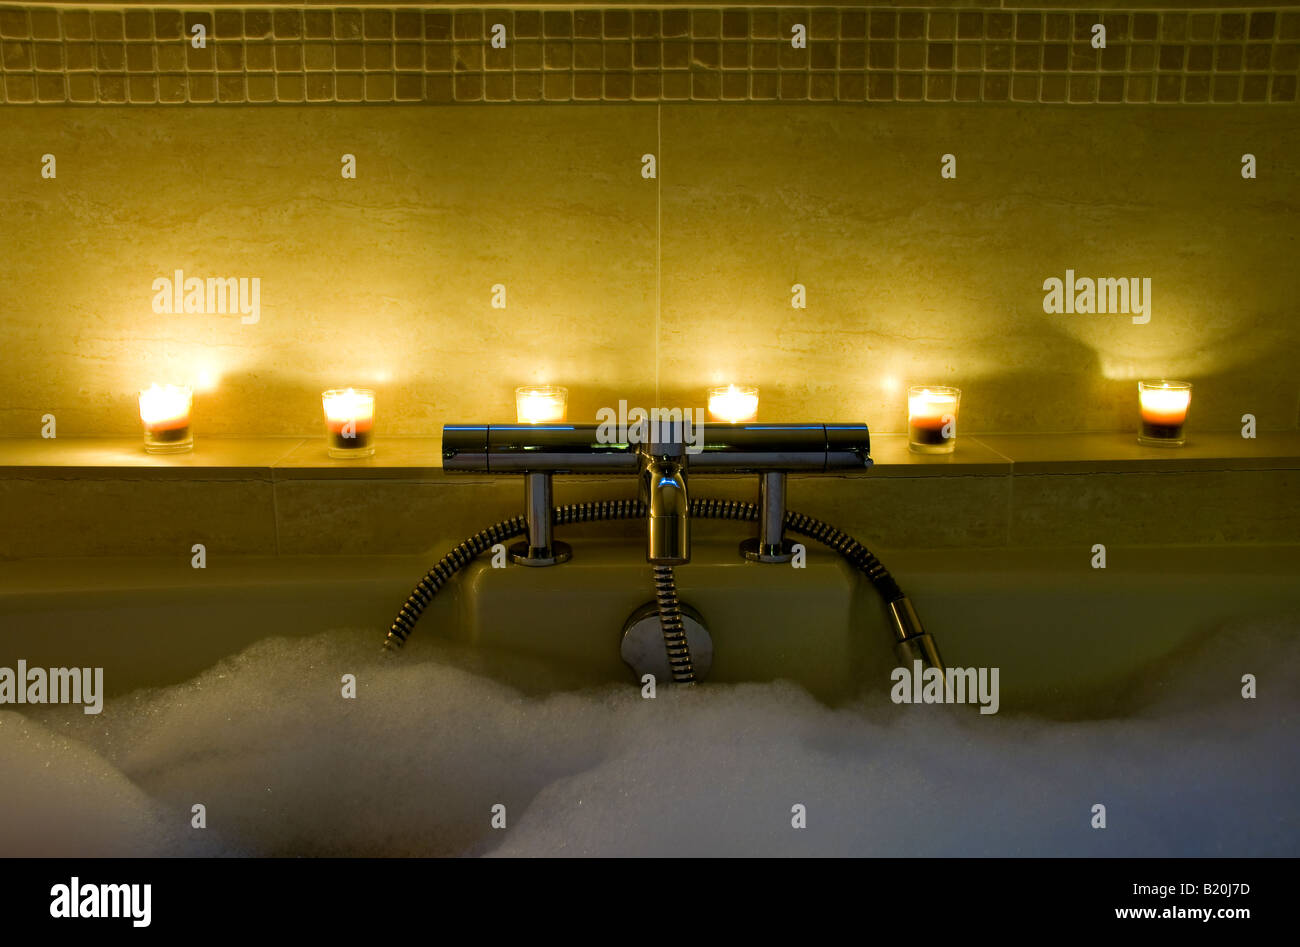 6 candles on a shelf behind a bath's taps Stock Photo